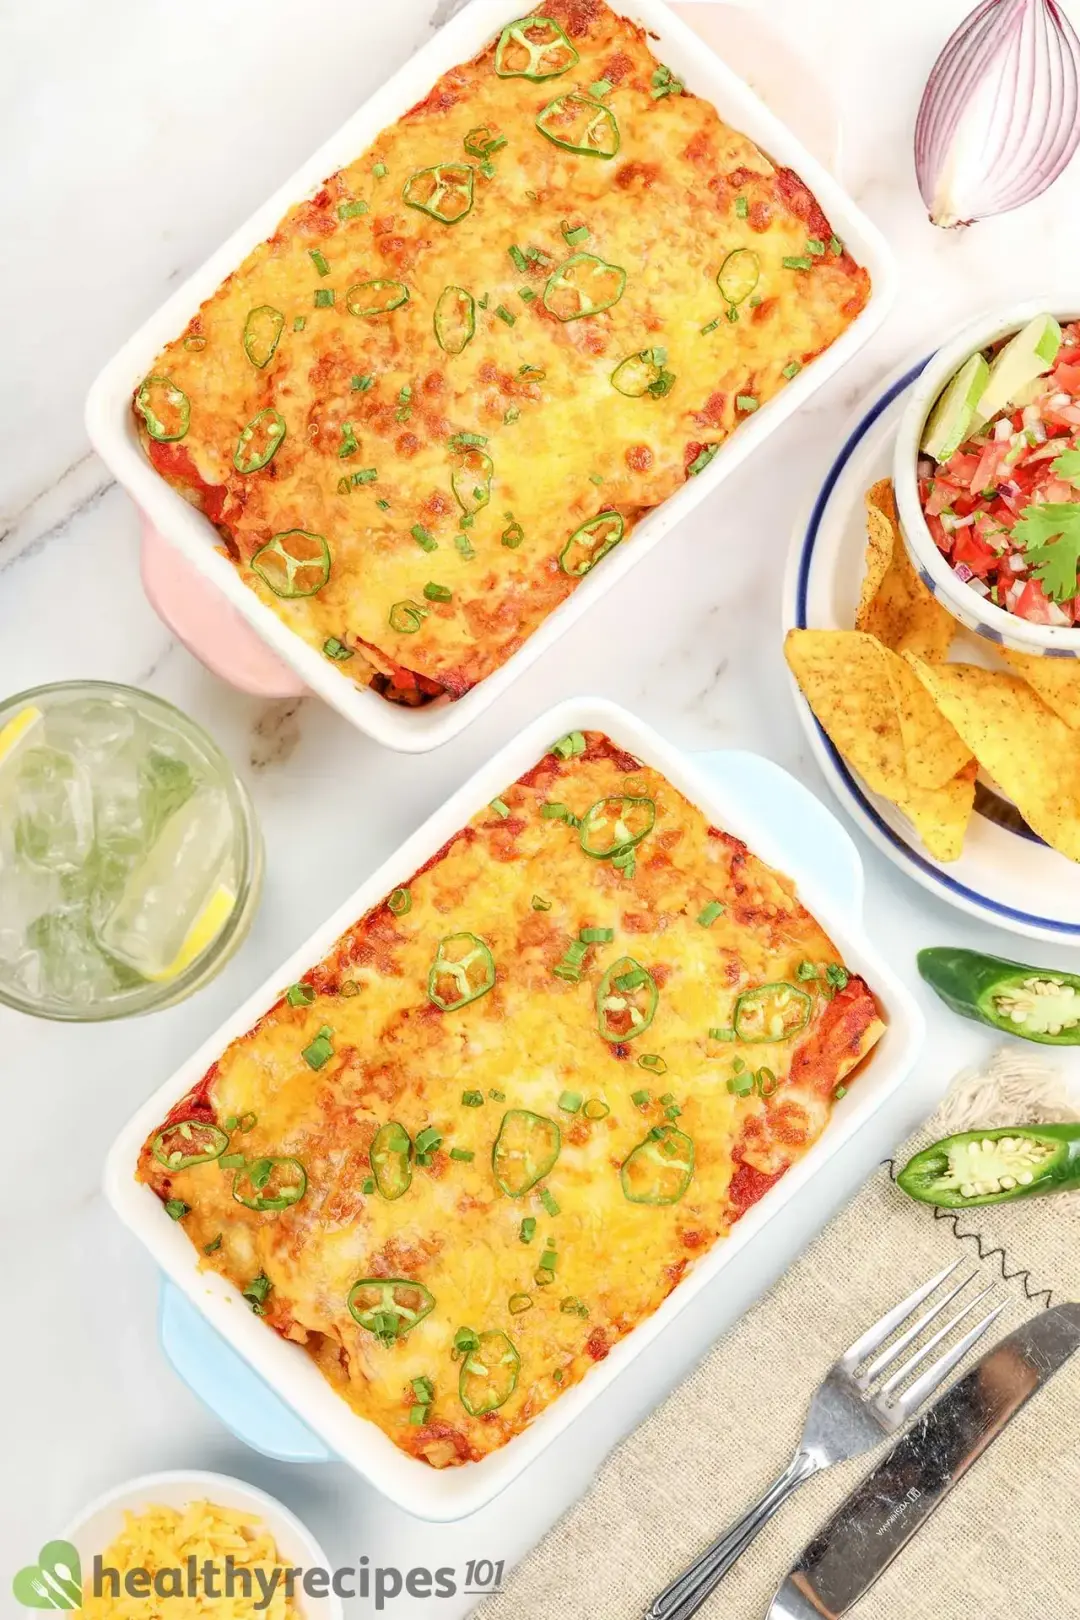 What Else Can You Put In Enchiladas